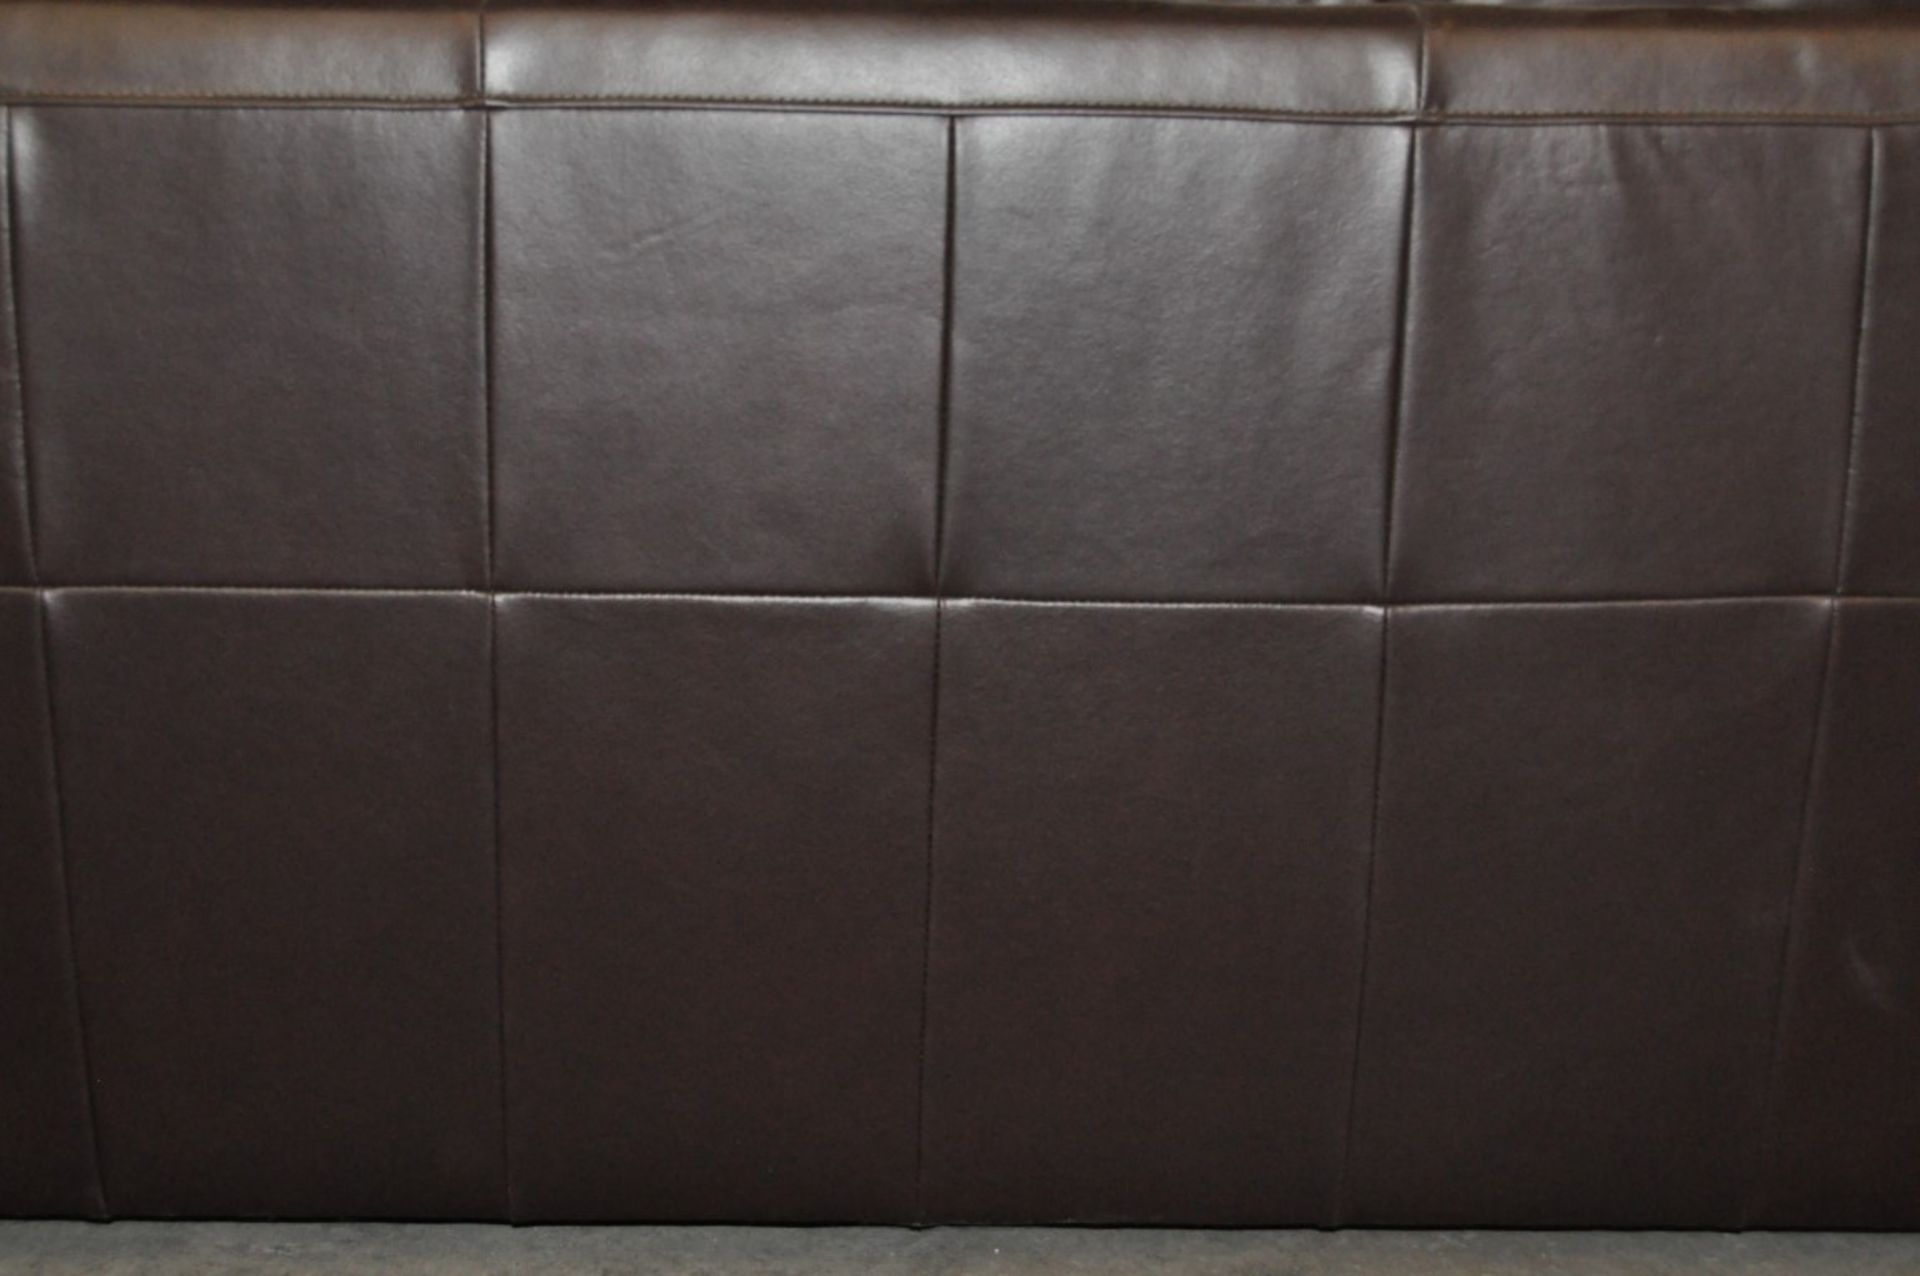 1 x Genuine Leather 3 Seater Sofa in Chocolate Brown – Design by Mark Webster – Ex Display - - Image 2 of 5